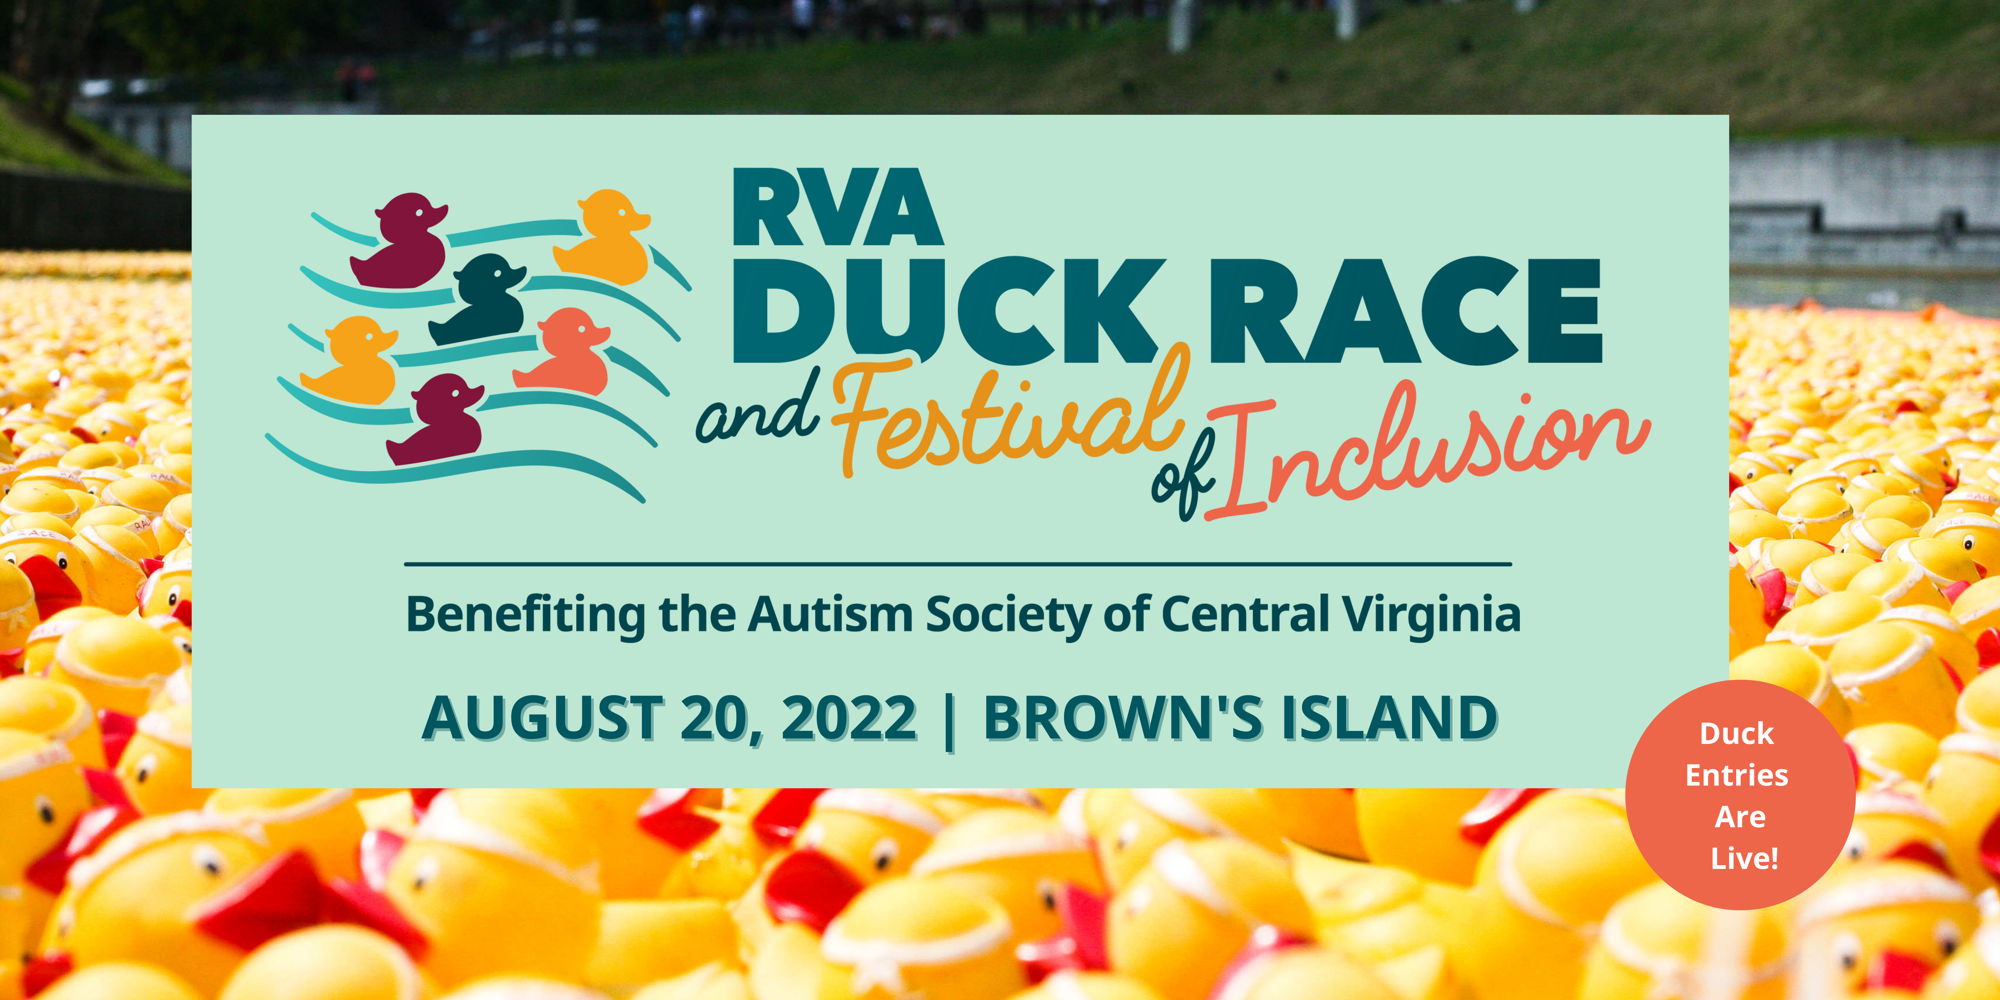 RVA Duck Race & Festival of Inclusion promotional image